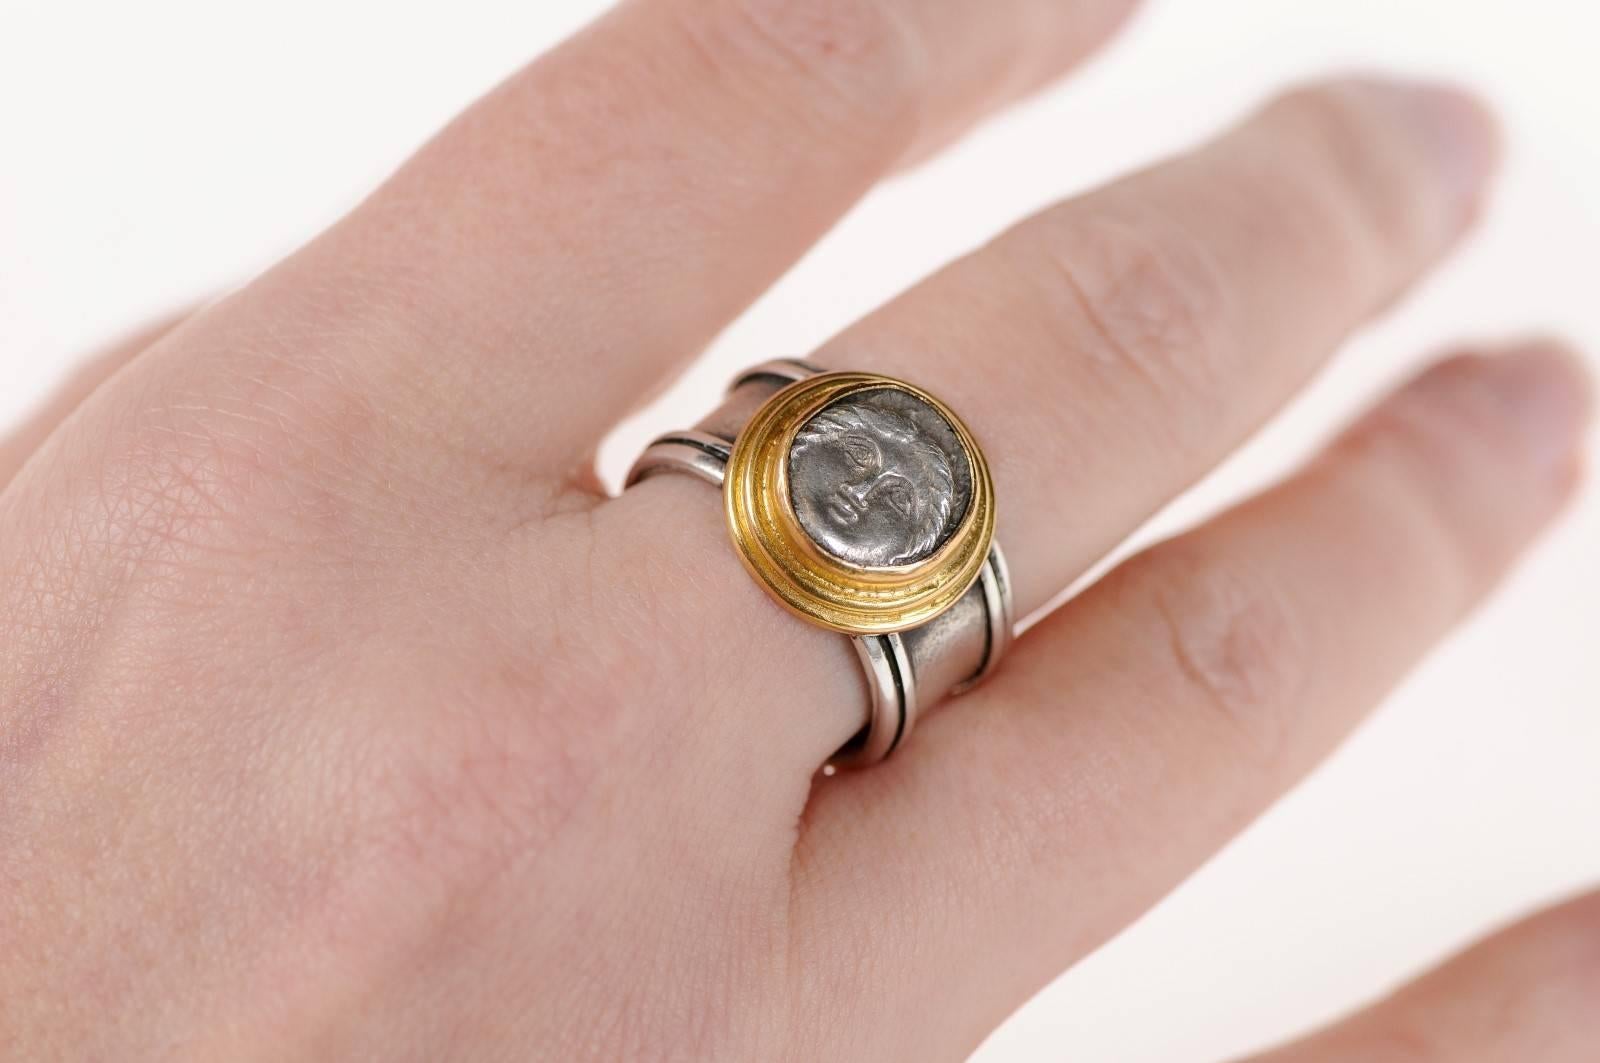 Classical Greek Authentic Greek Apollonia Pontika Coin, Silver and 22-Karat Gold Banded Ring